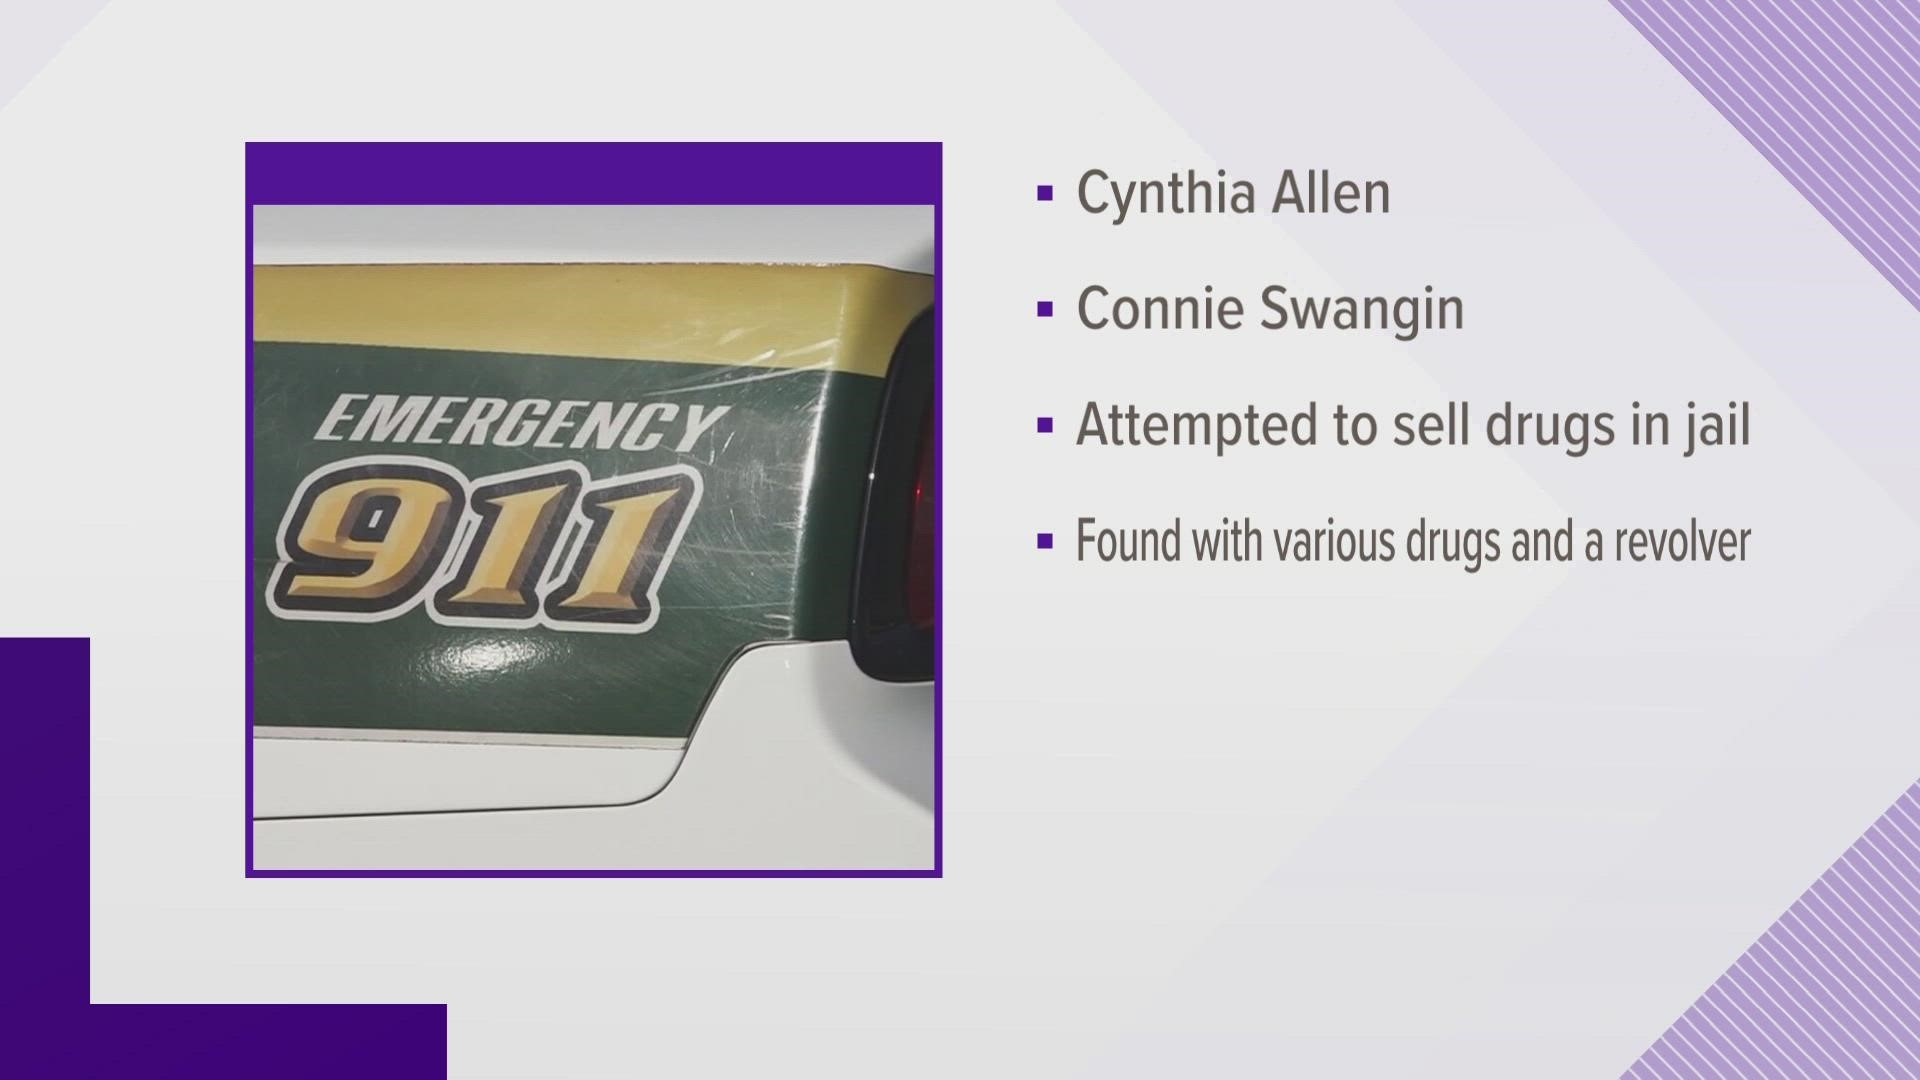 Deputies said they stopped two women and found a container with 65 grams of a "white, crystal substance."